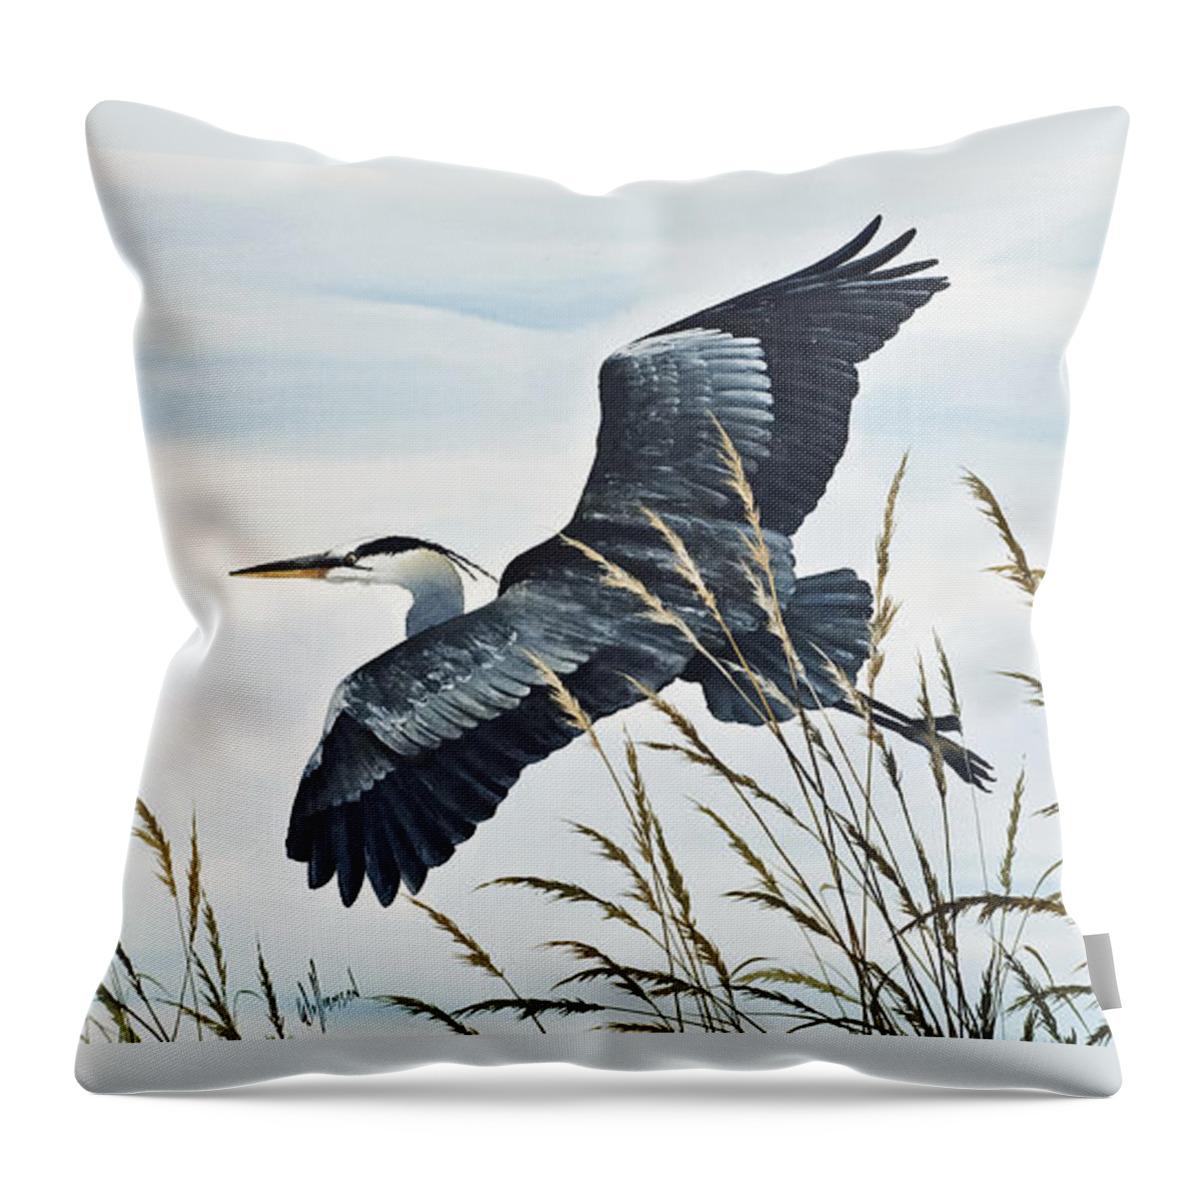 Heron Throw Pillow featuring the painting Herons Flight by James Williamson